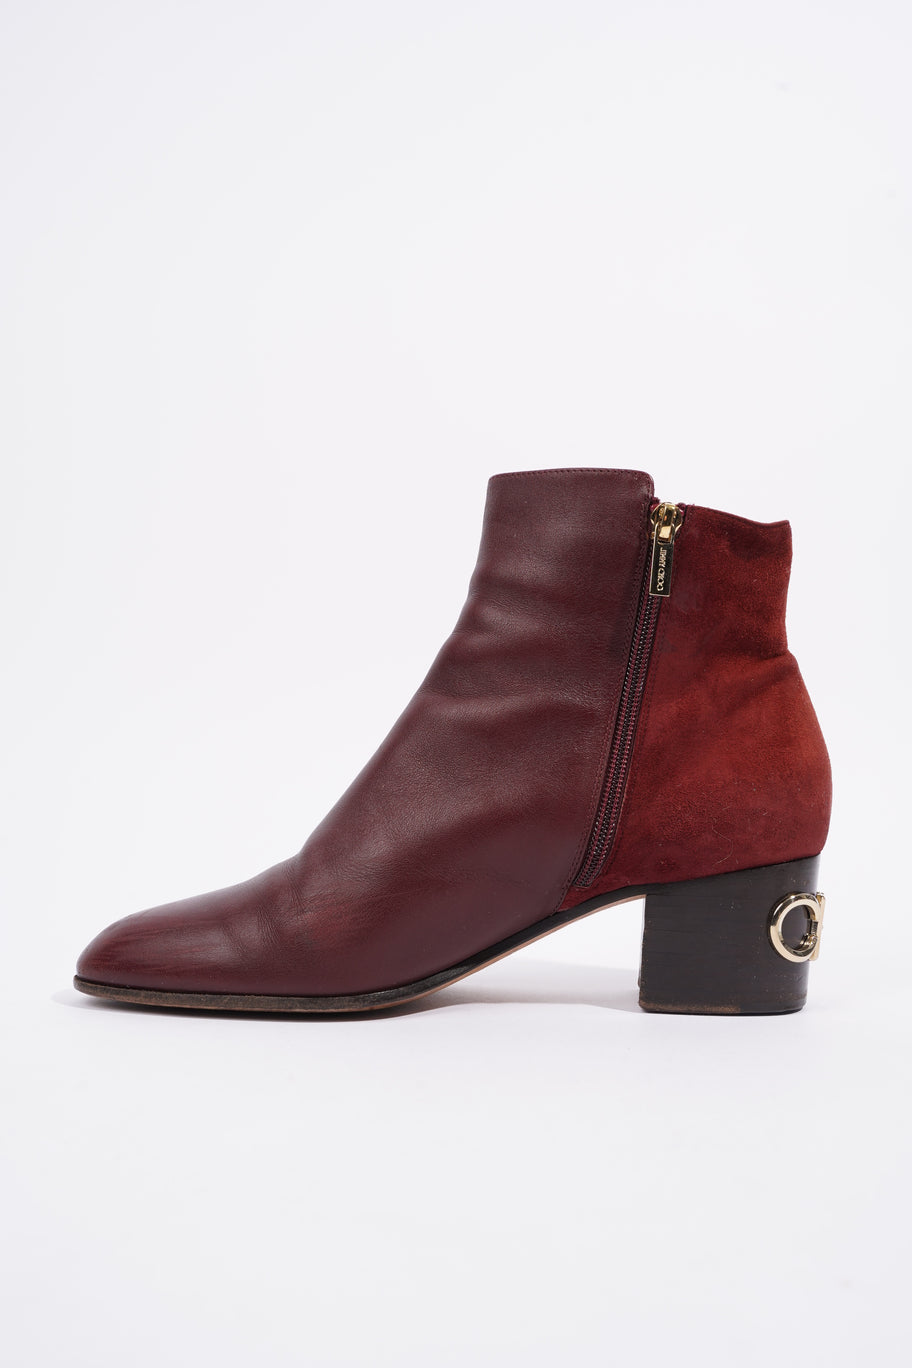 Ankle Boot Red Leather EU 41 UK 8 Image 2